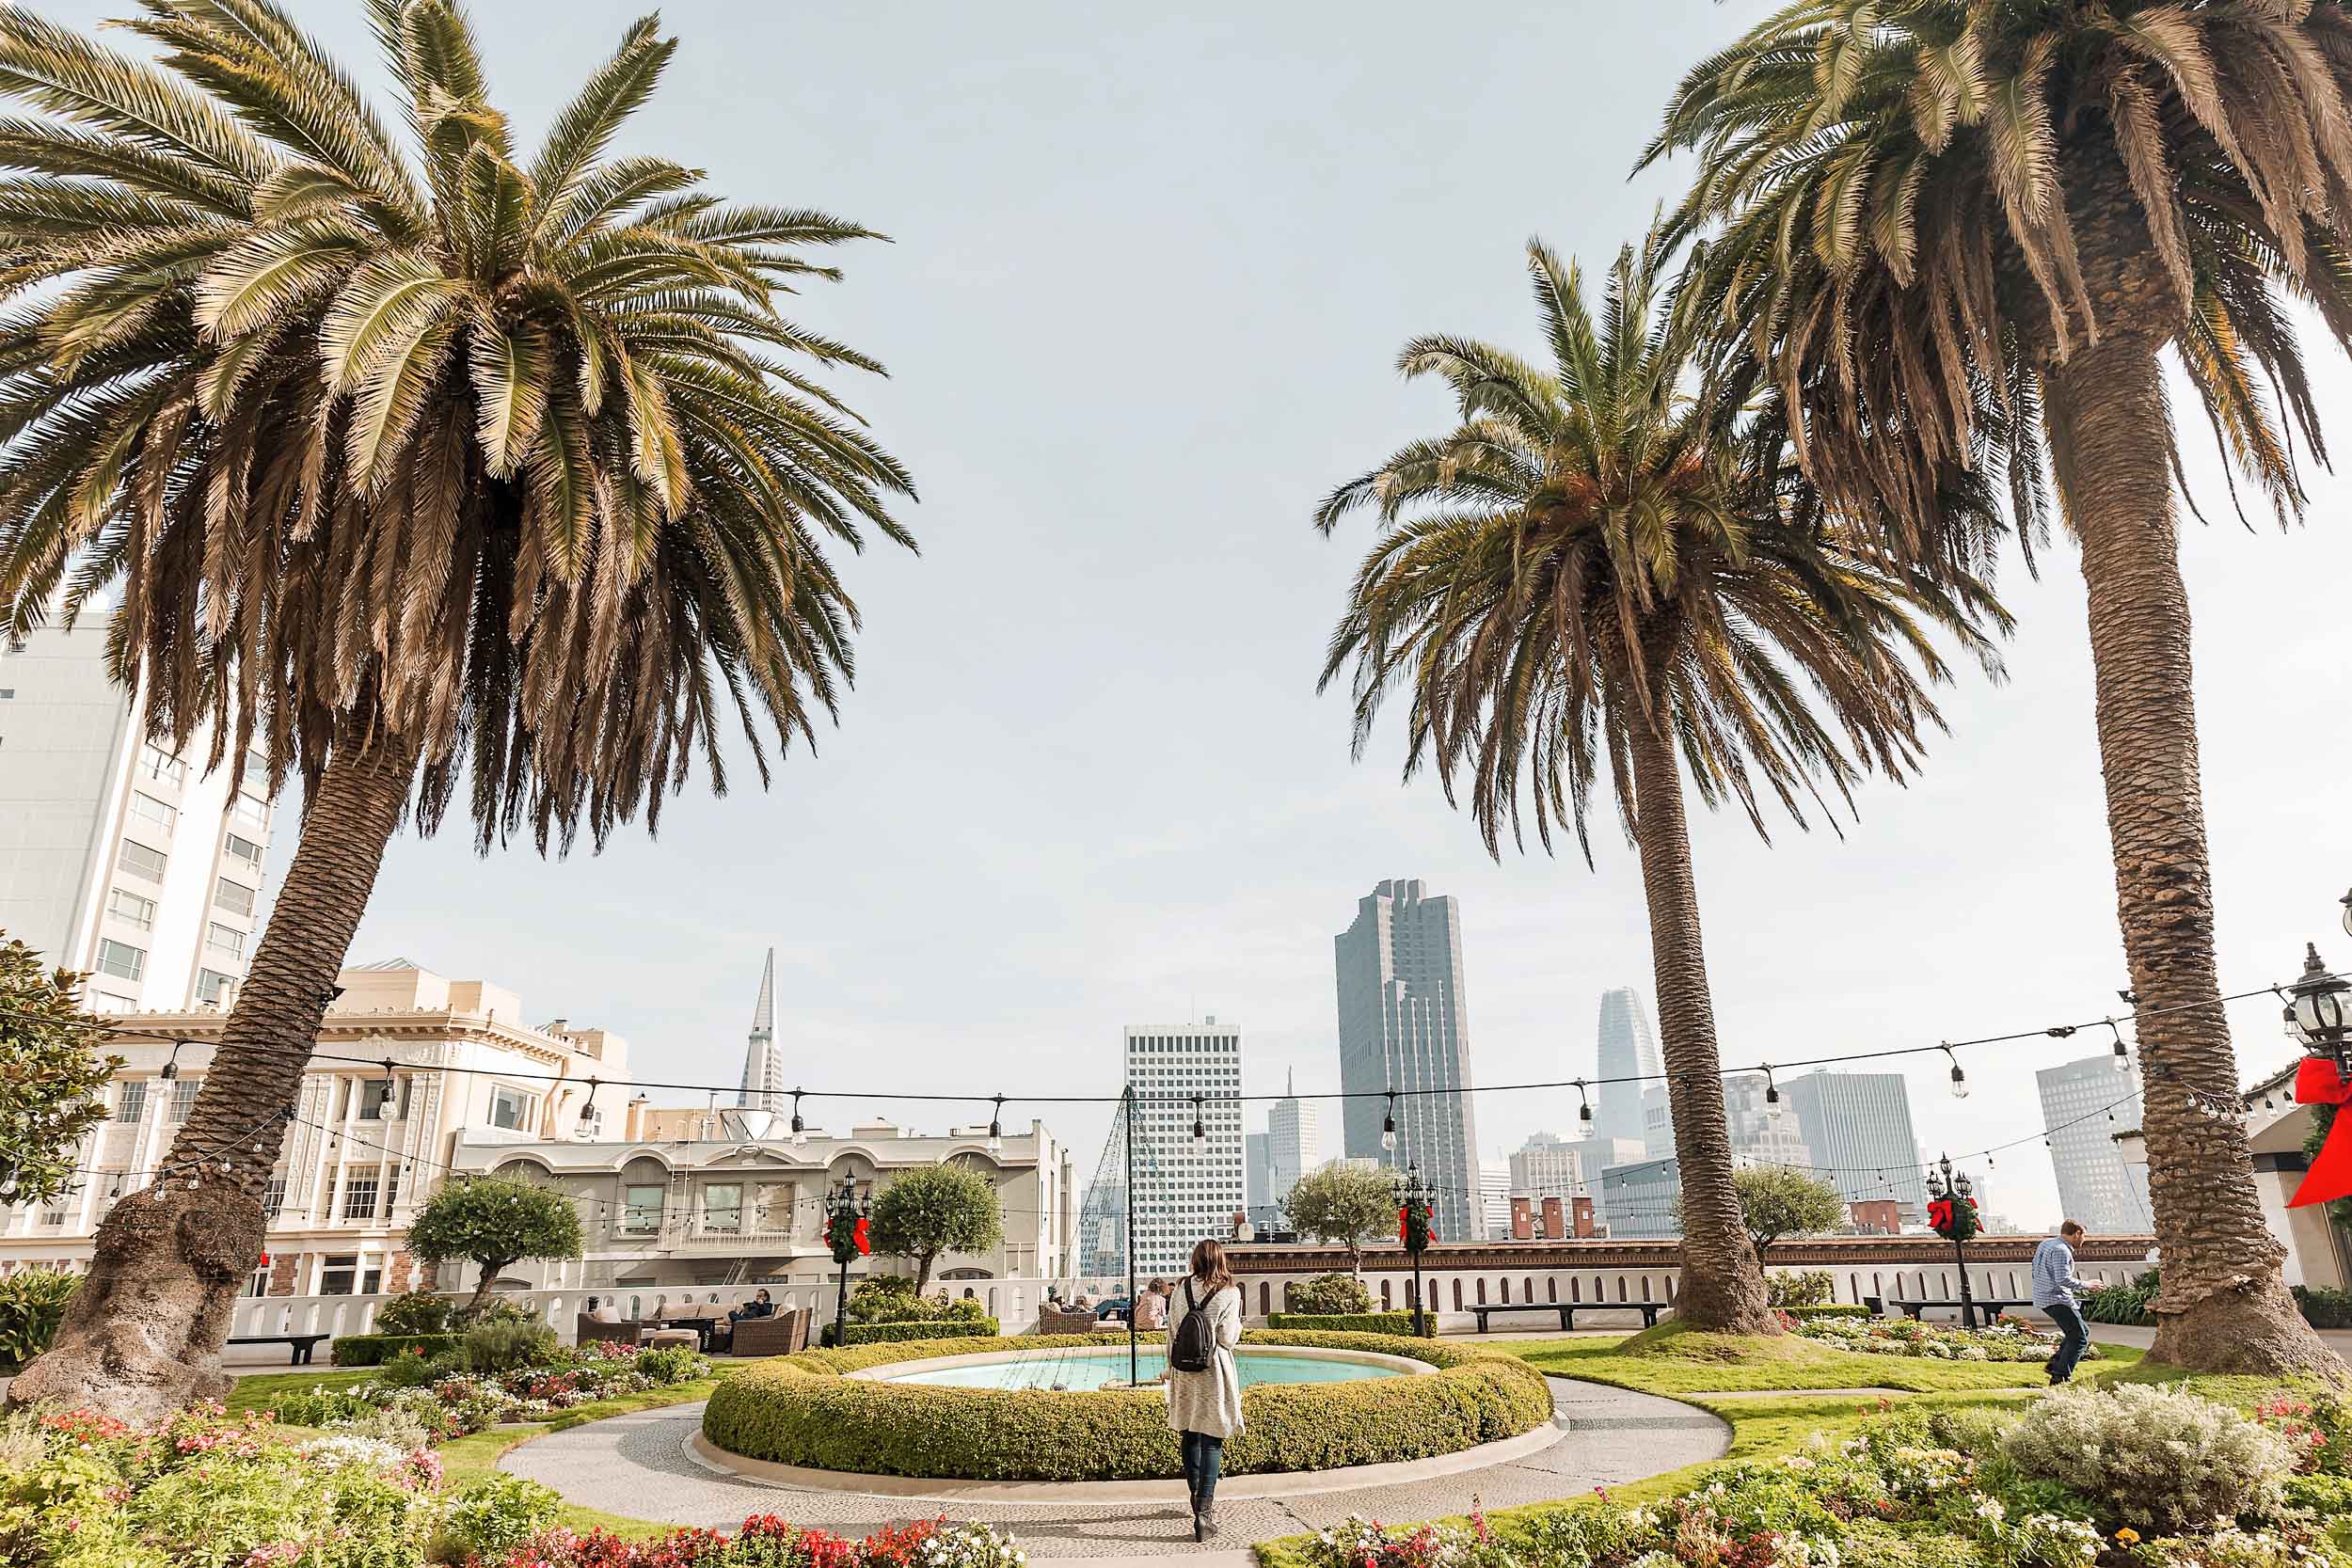 The rooftop garden of the Fairmont San Francisco offers beautiful city views